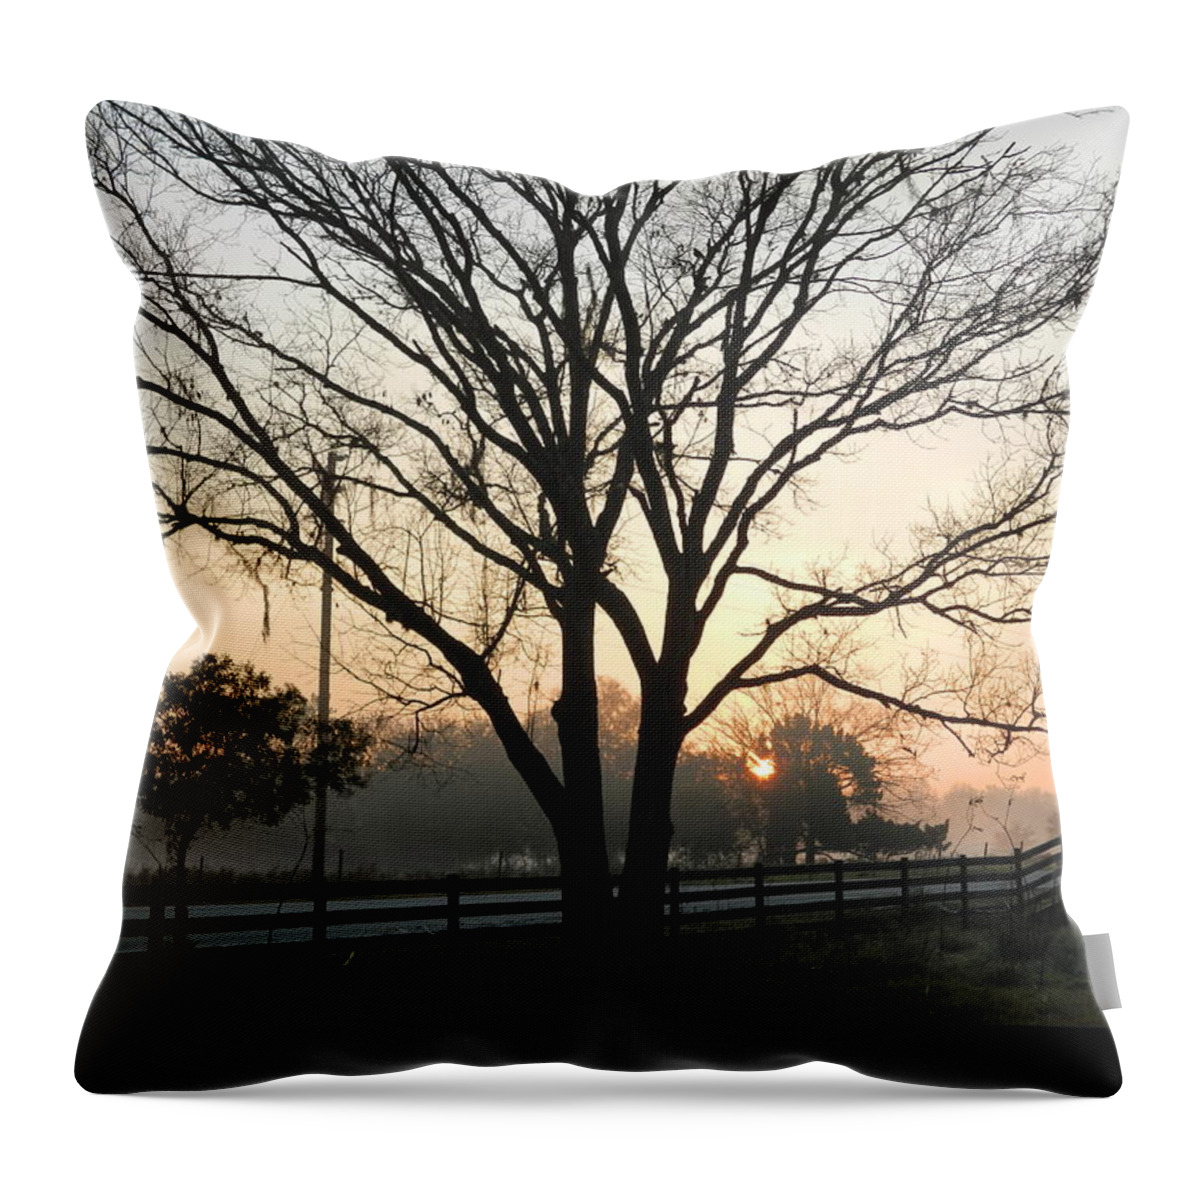 Sunrise Throw Pillow featuring the photograph Farm Sunrise by George Pedro